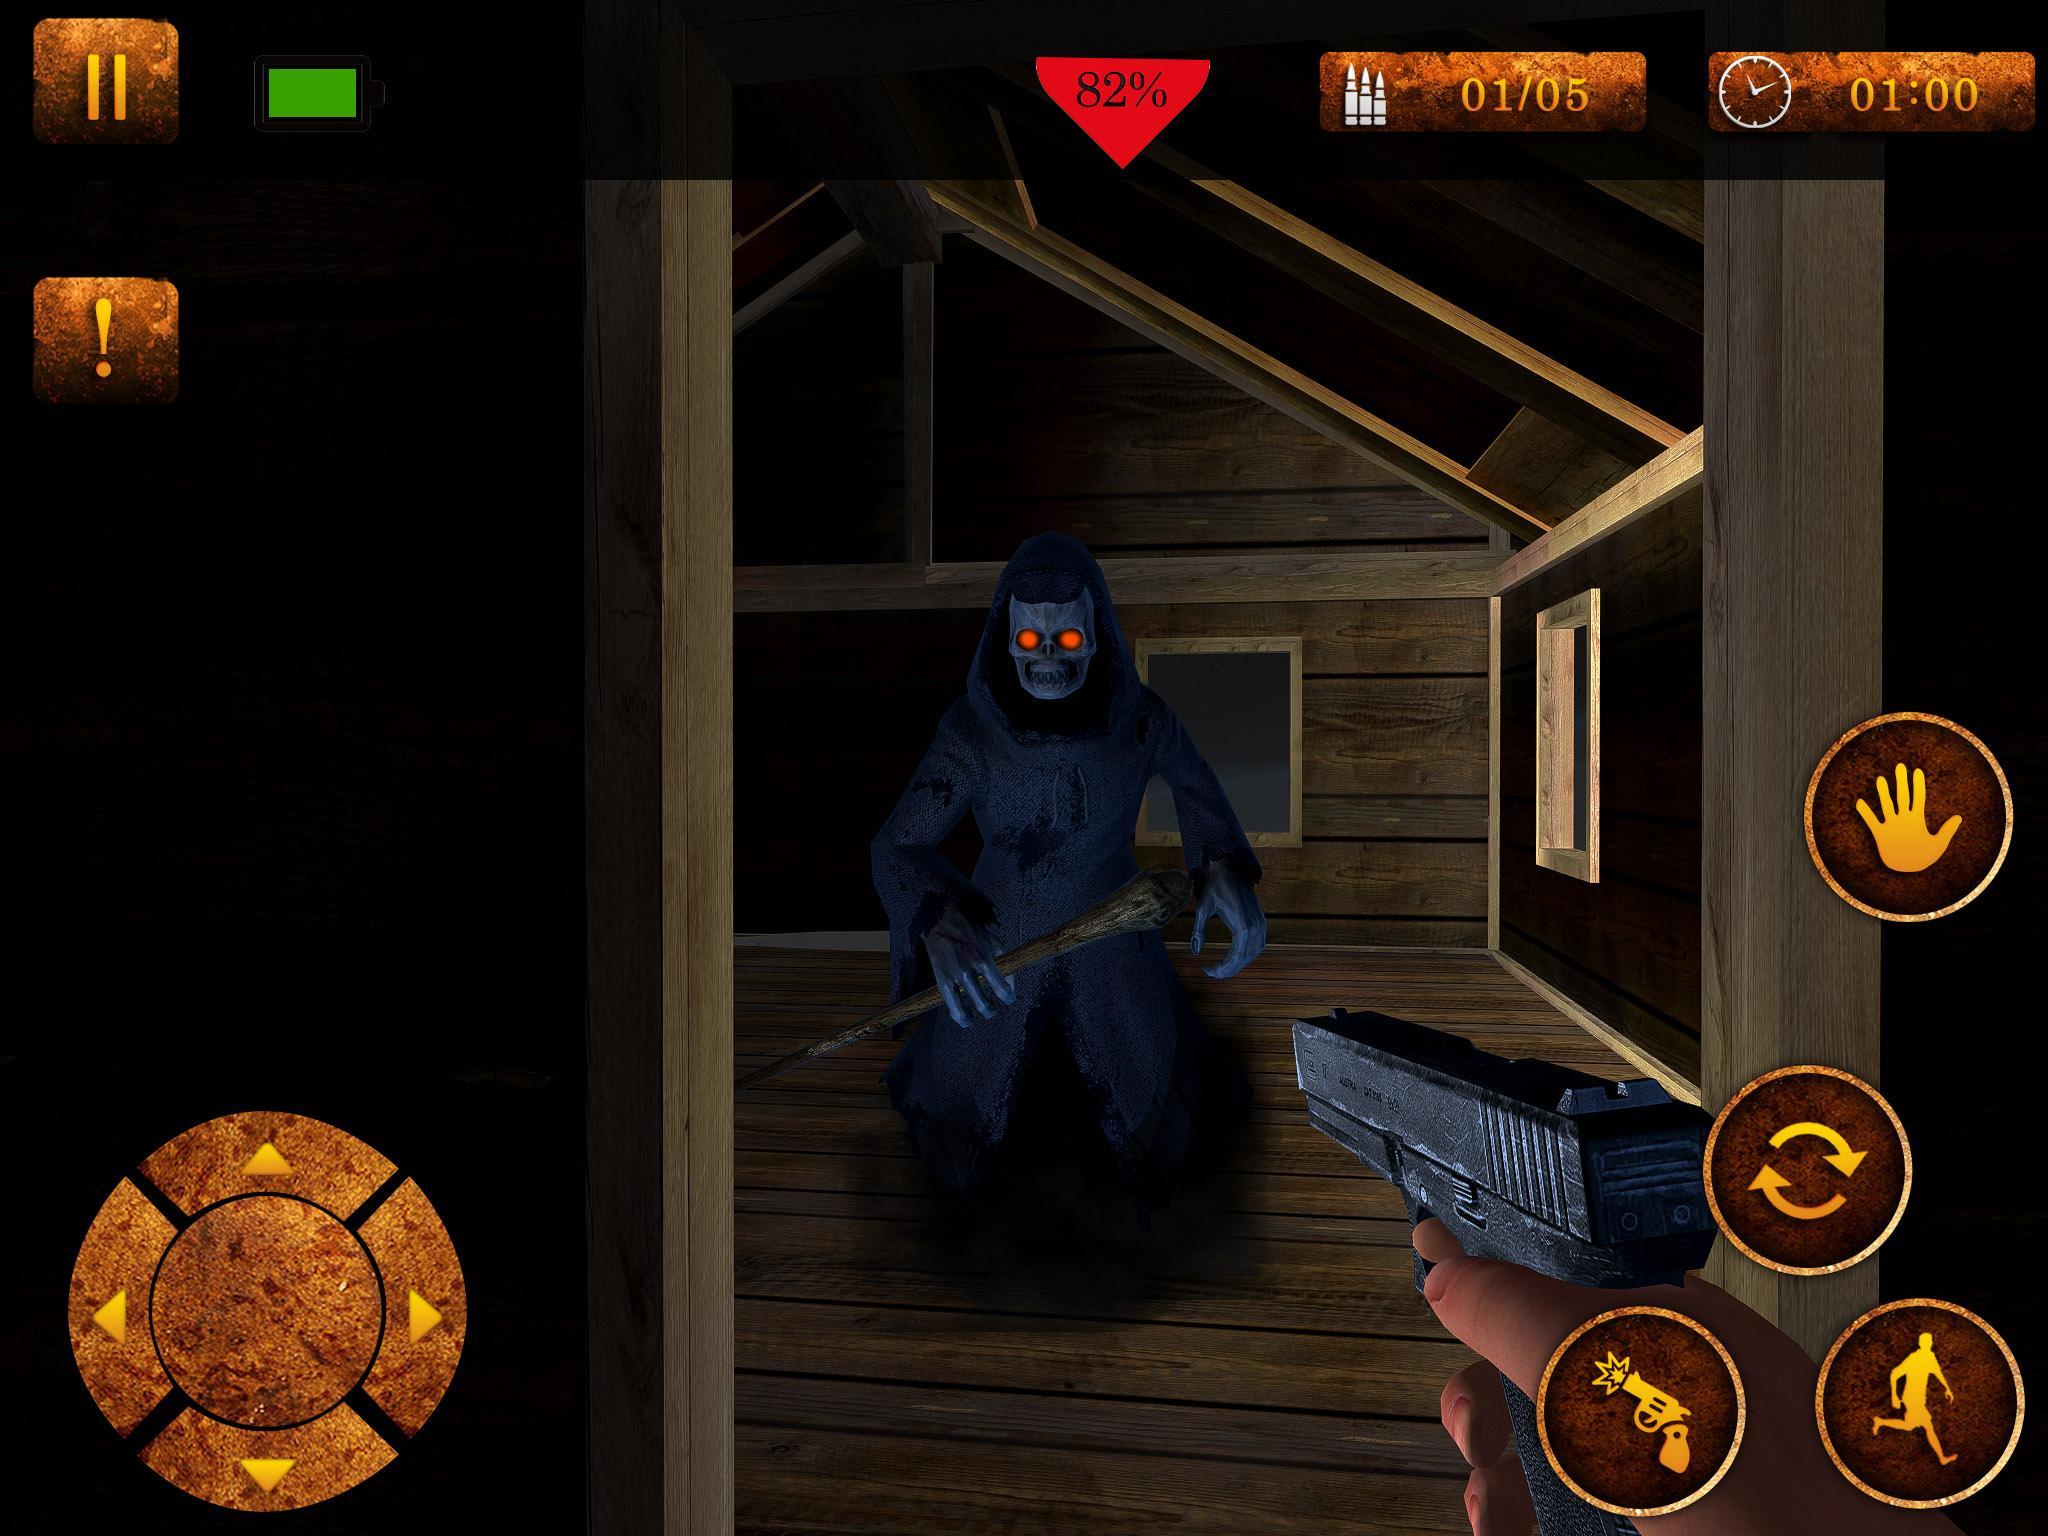 Evil Haunted Ghost For Android - APK Download